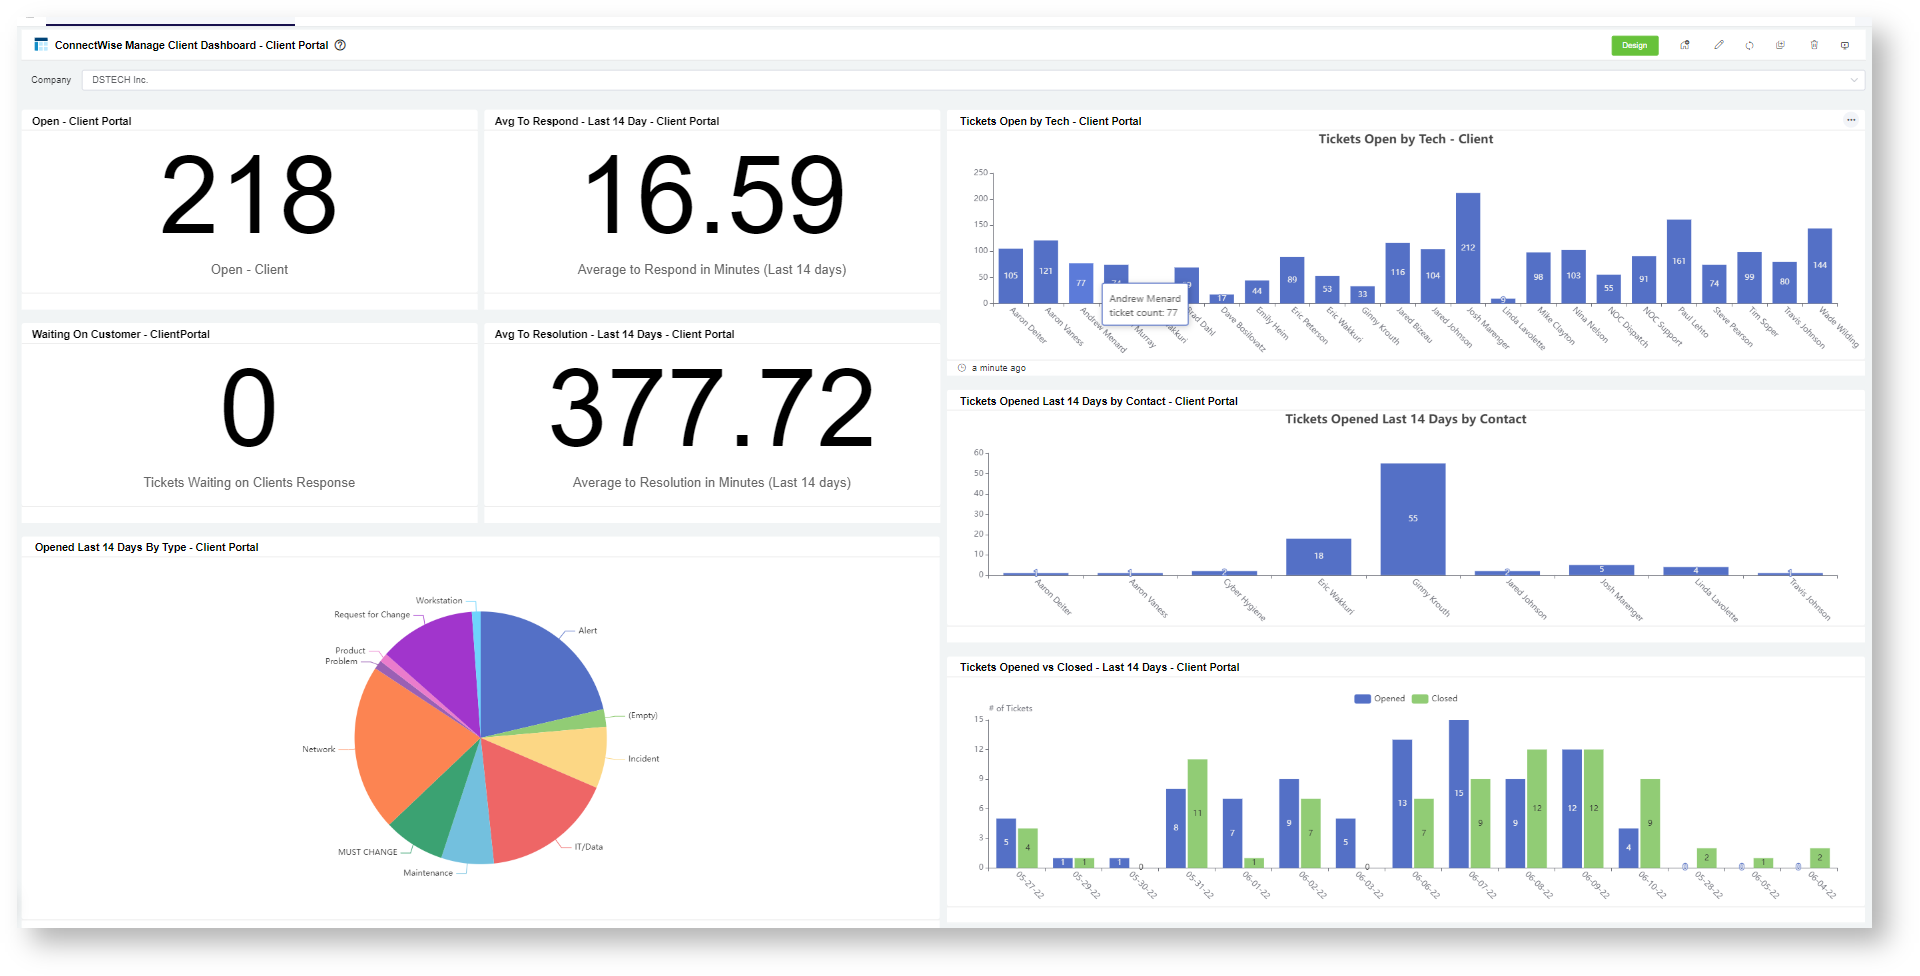 Client Portal Dashboard for ConnecWise